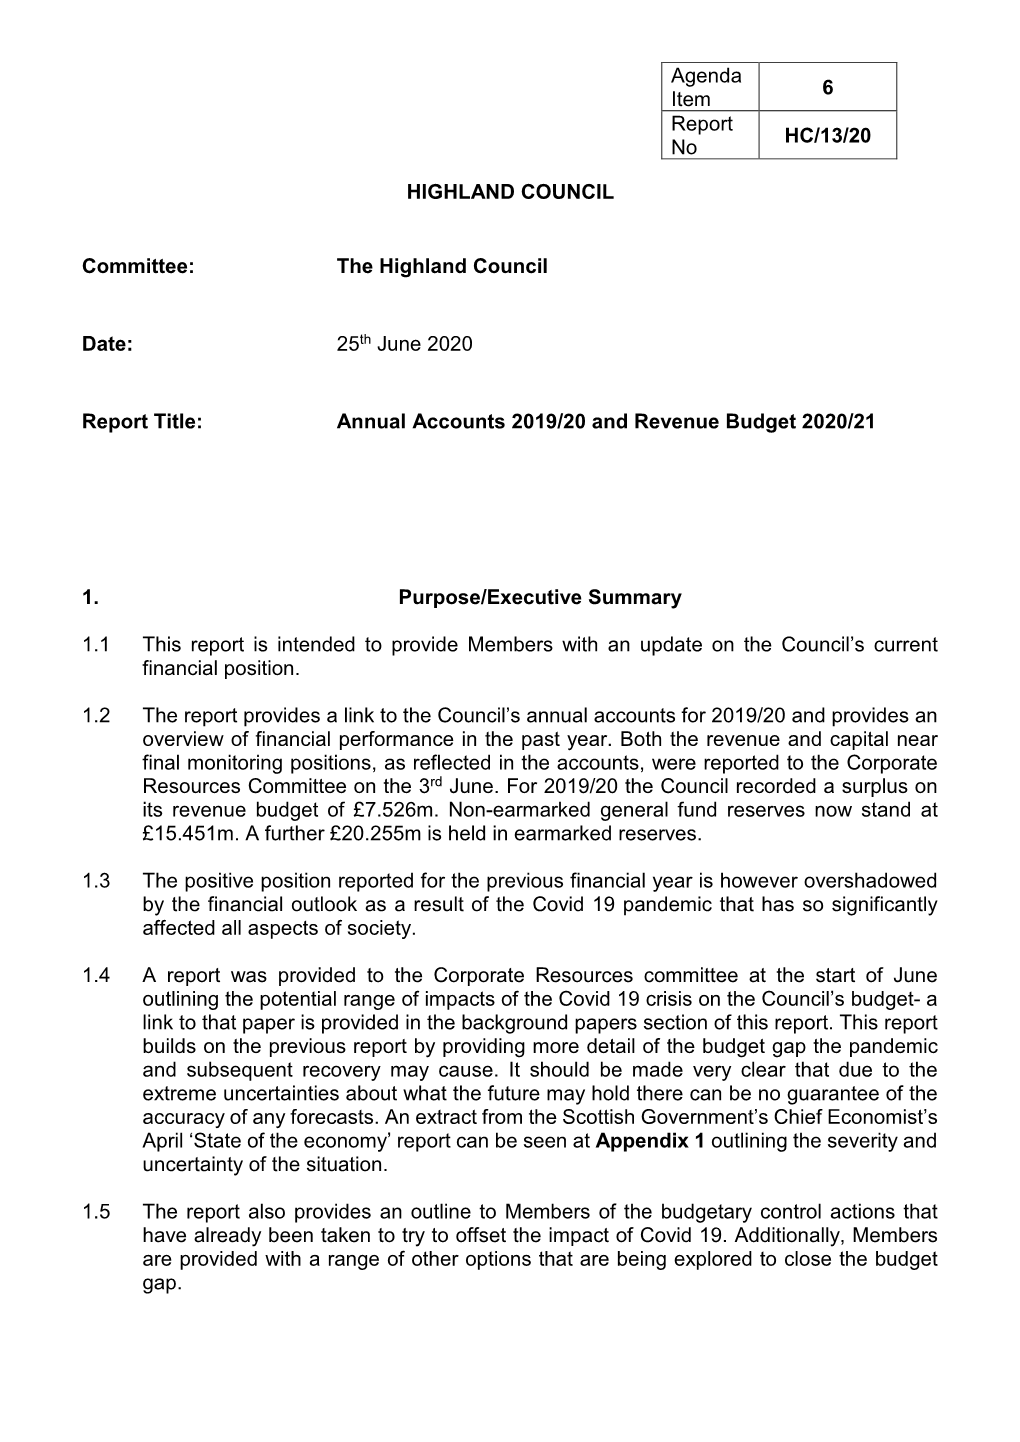 Item 6 Annual Accounts 2019/20 and Revenue Budget 2020/21